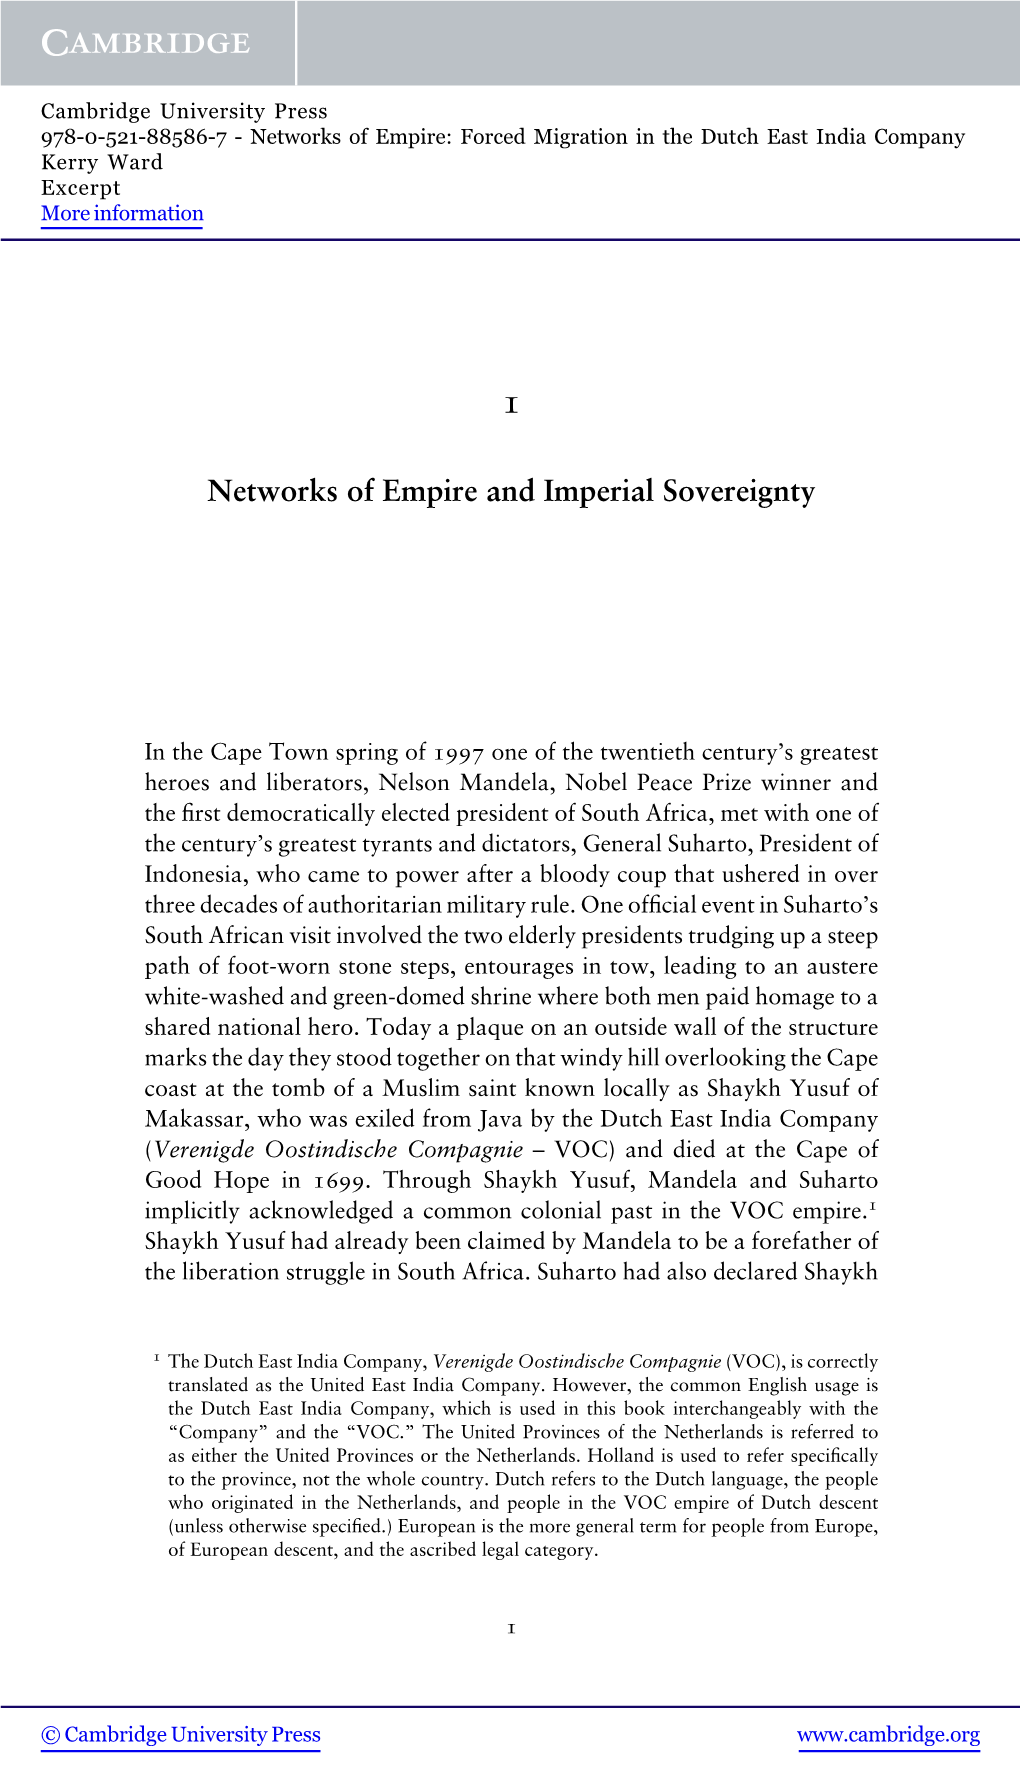 Networks of Empire and Imperial Sovereignty